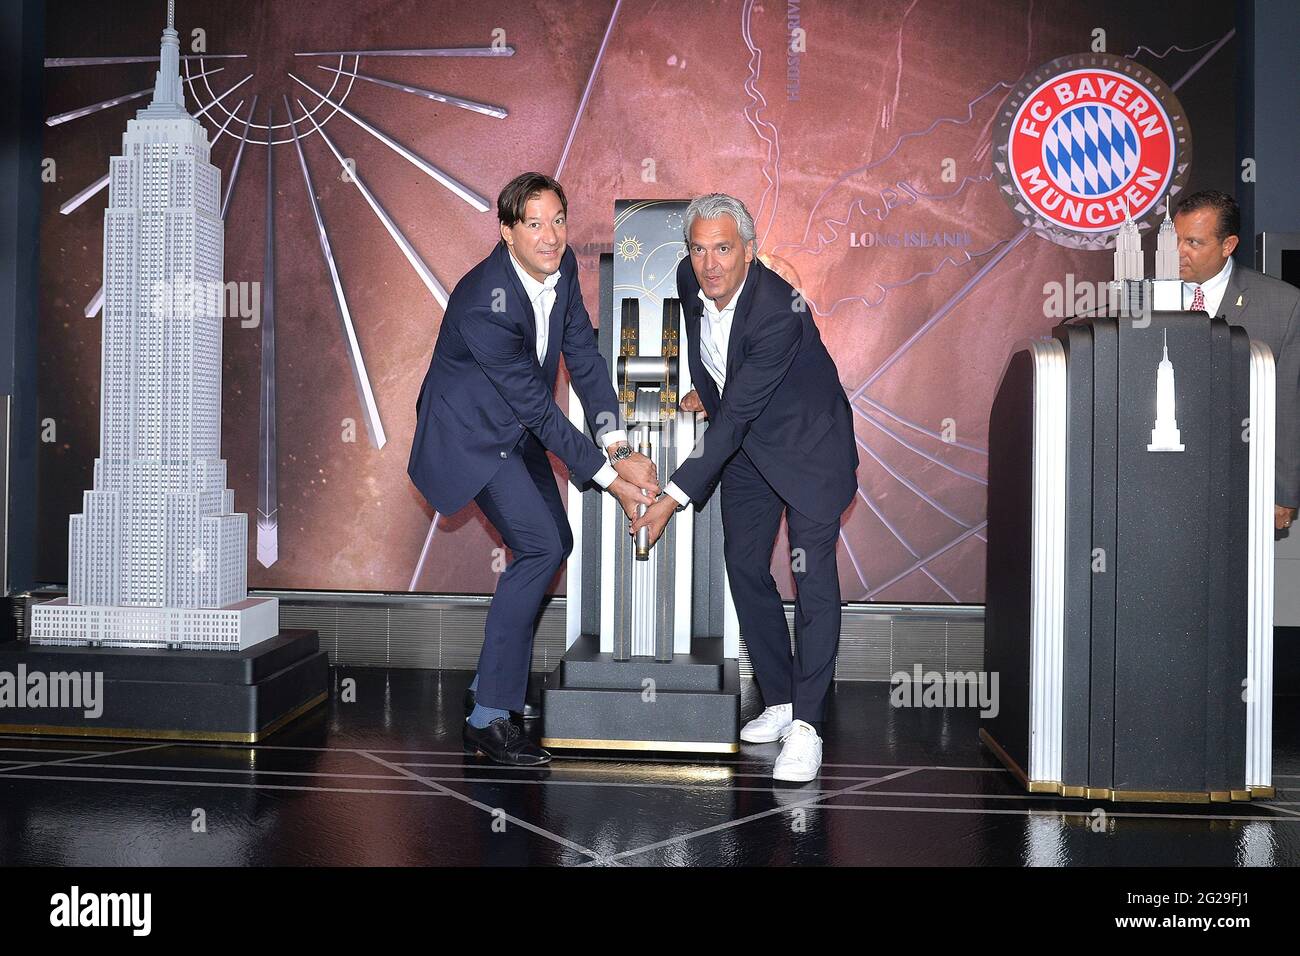 New York, USA. 09th June, 2021. (L-R) Rudolf Vidal, FC Bayern Munich, President - Americas and Joerg Wacker, FC Bayern Munich, Board Member for internationalization and strategy, from FC Bayern Munich, German professional soccer sports club, visit the Empire State Building for a special lighting ceremony in New York, NY, June 9, 2021. (Photo by Anthony Behar/Sipa USA) Credit: Sipa USA/Alamy Live News Stock Photo